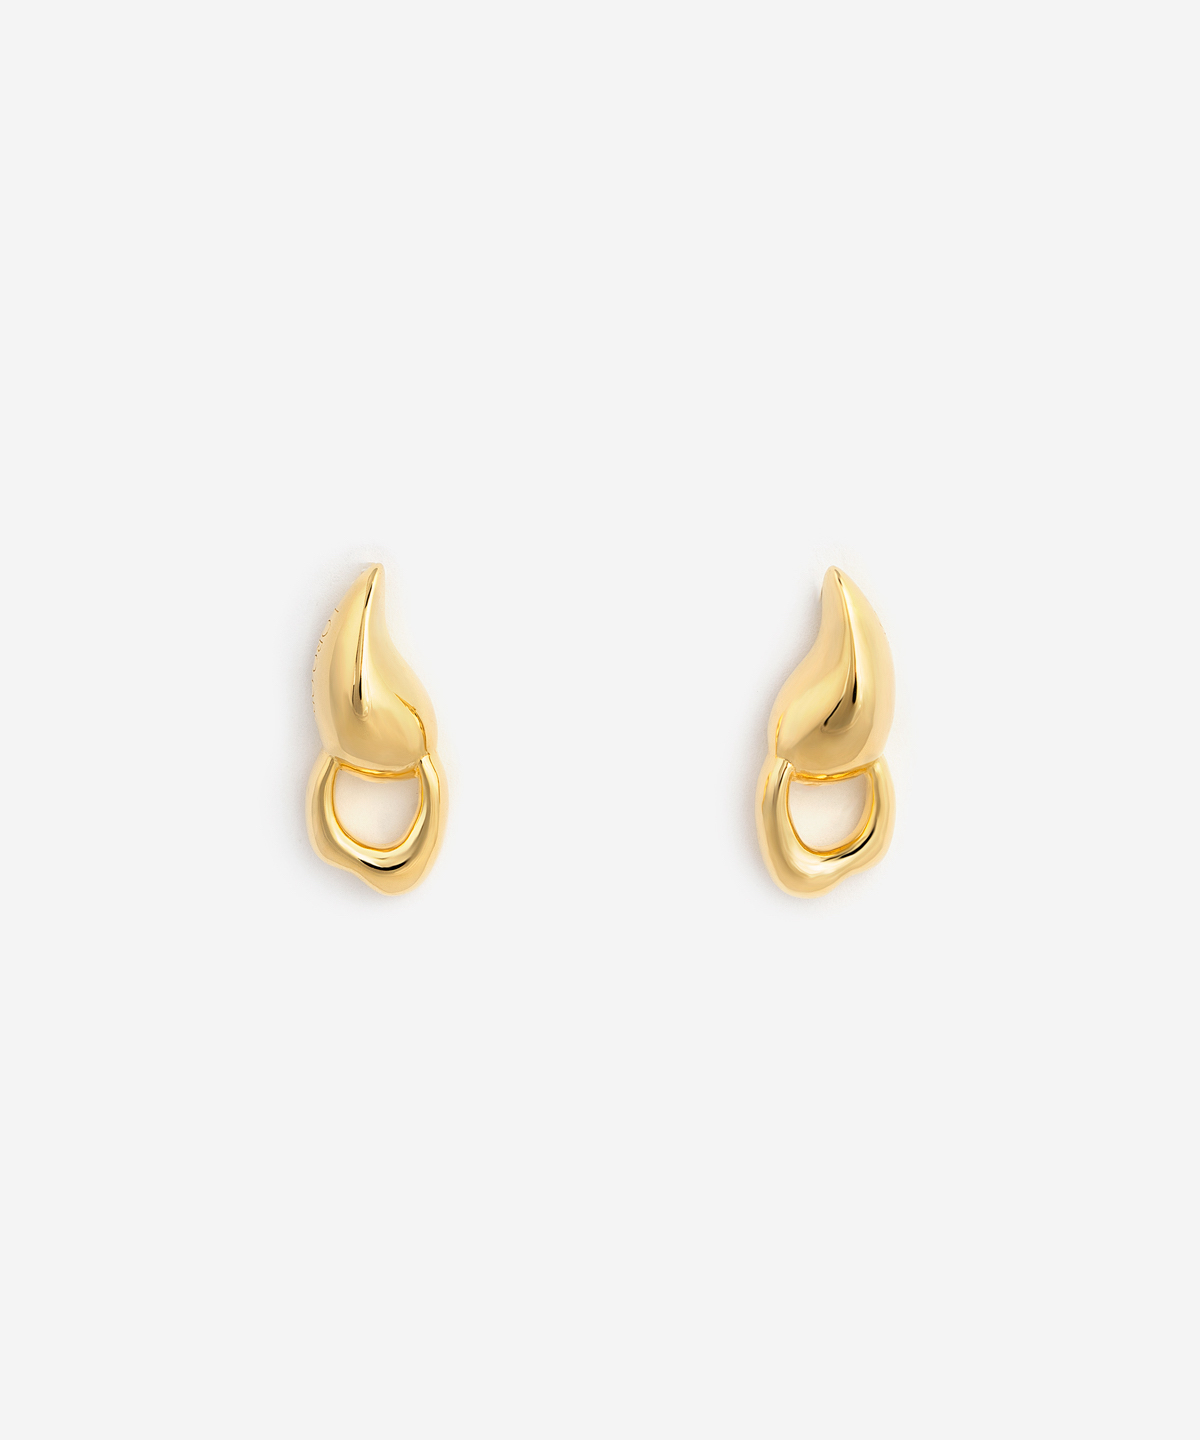 Drops earrings gold-plated